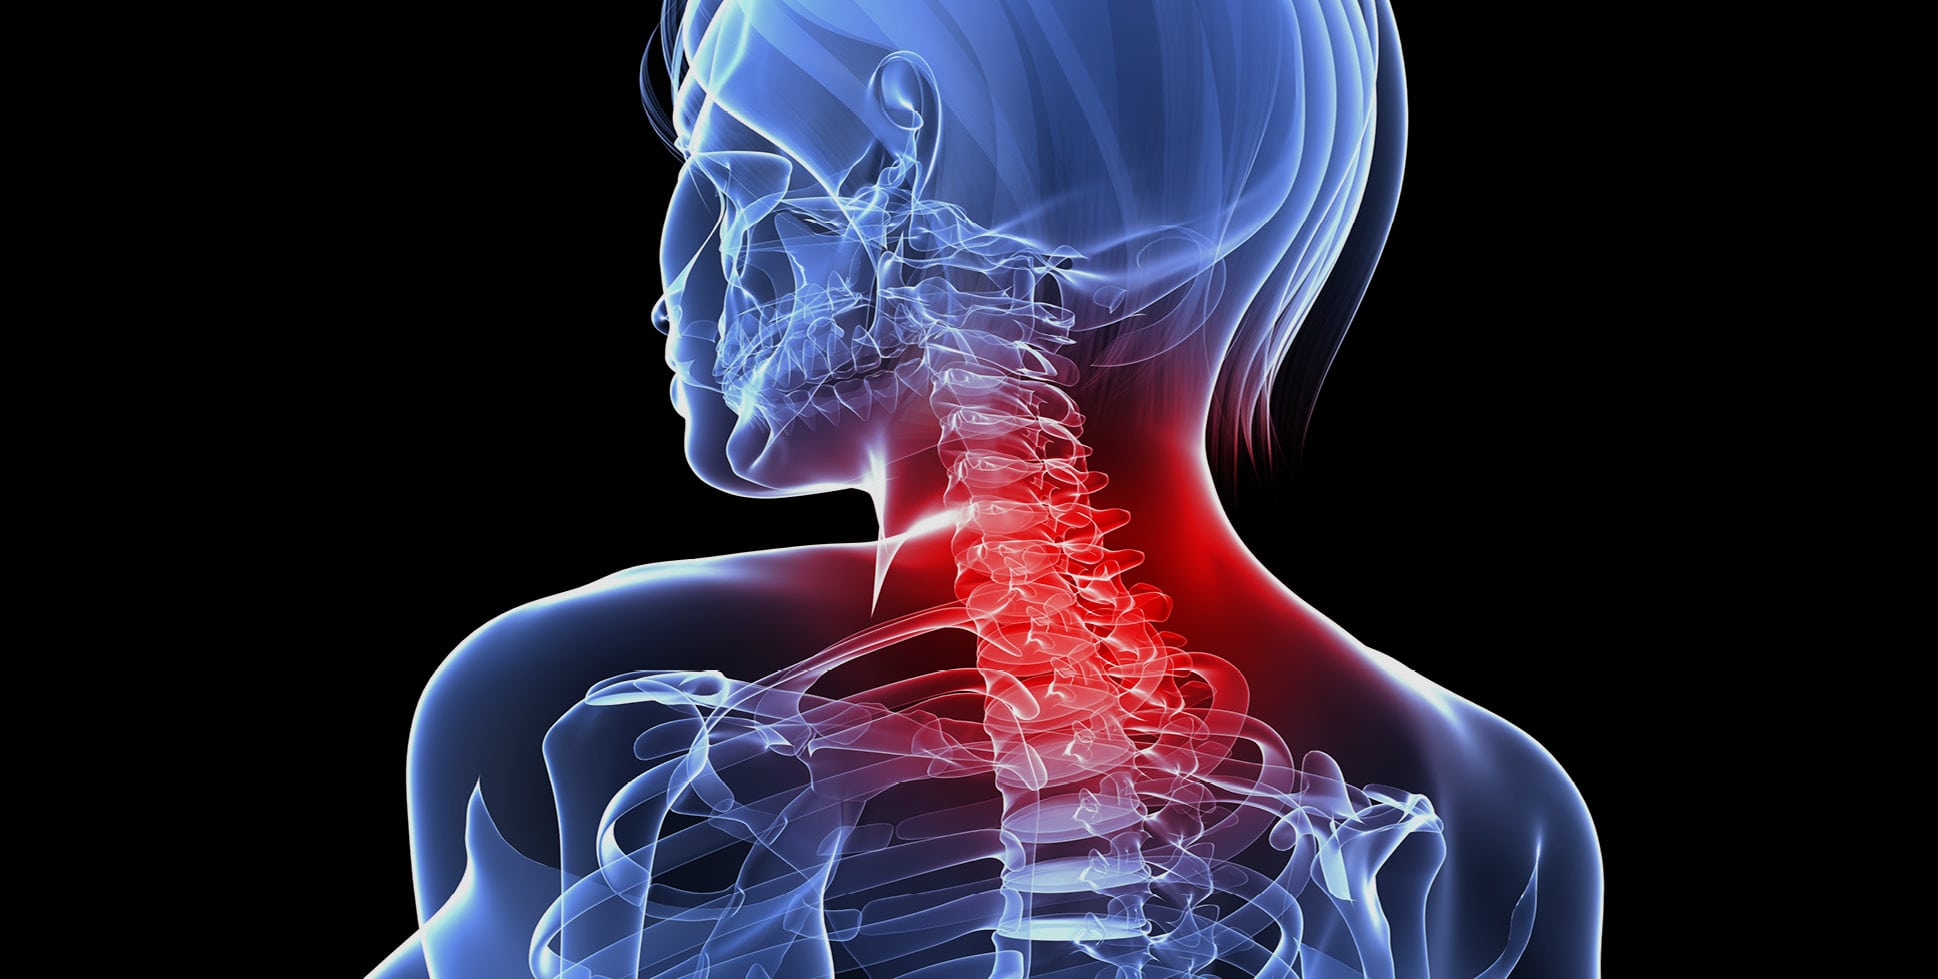 Physiotherapy management of neck pain